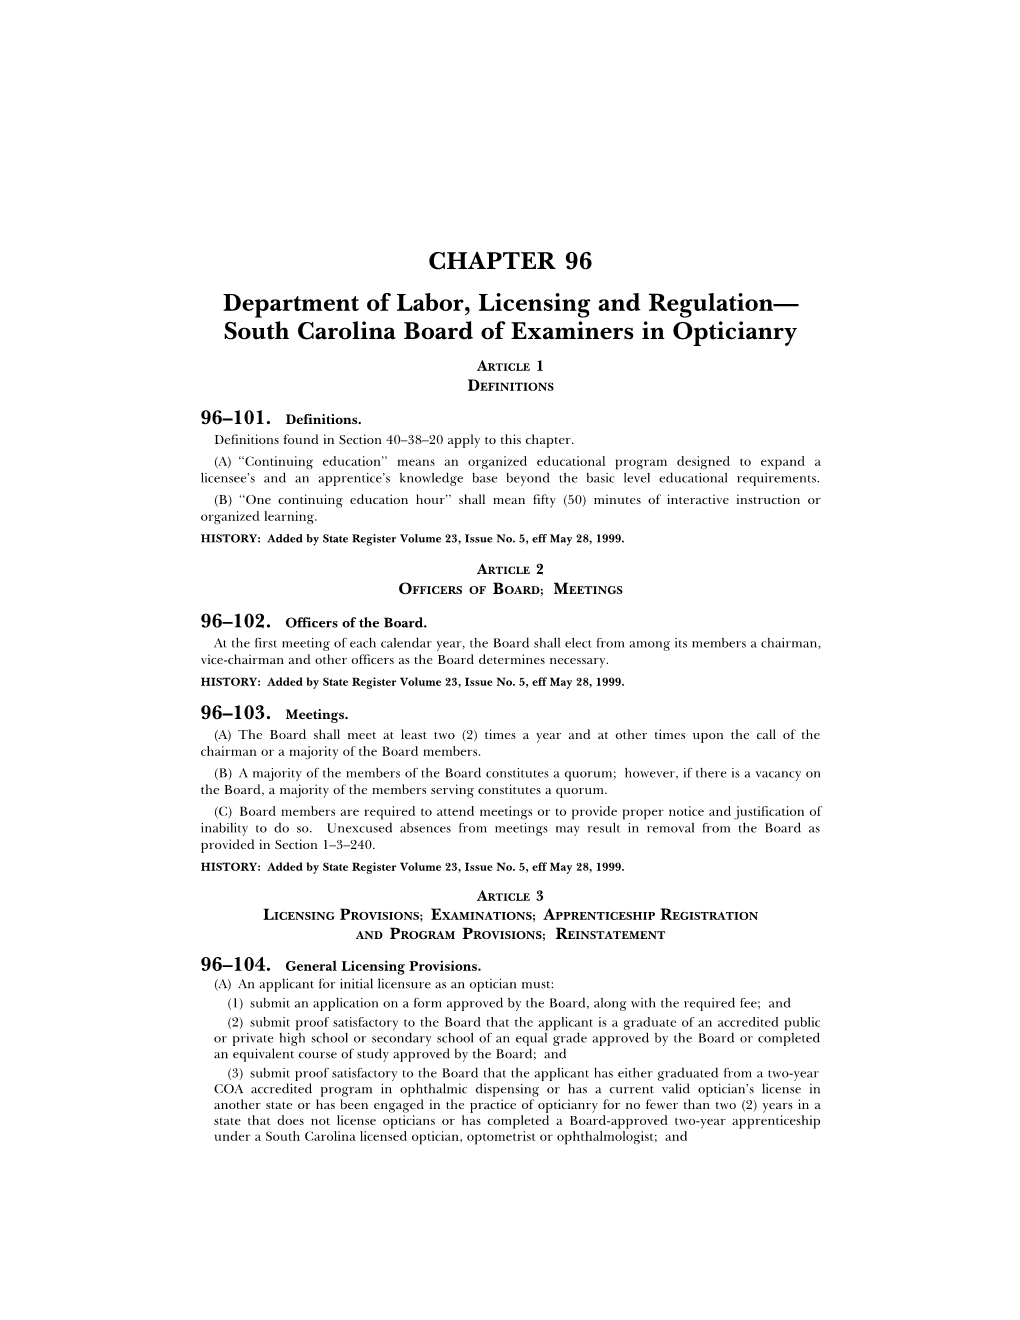 CHAPTER 96 Department of Labor, Licensing and Regulation— South Carolina Board of Examiners in Opticianry